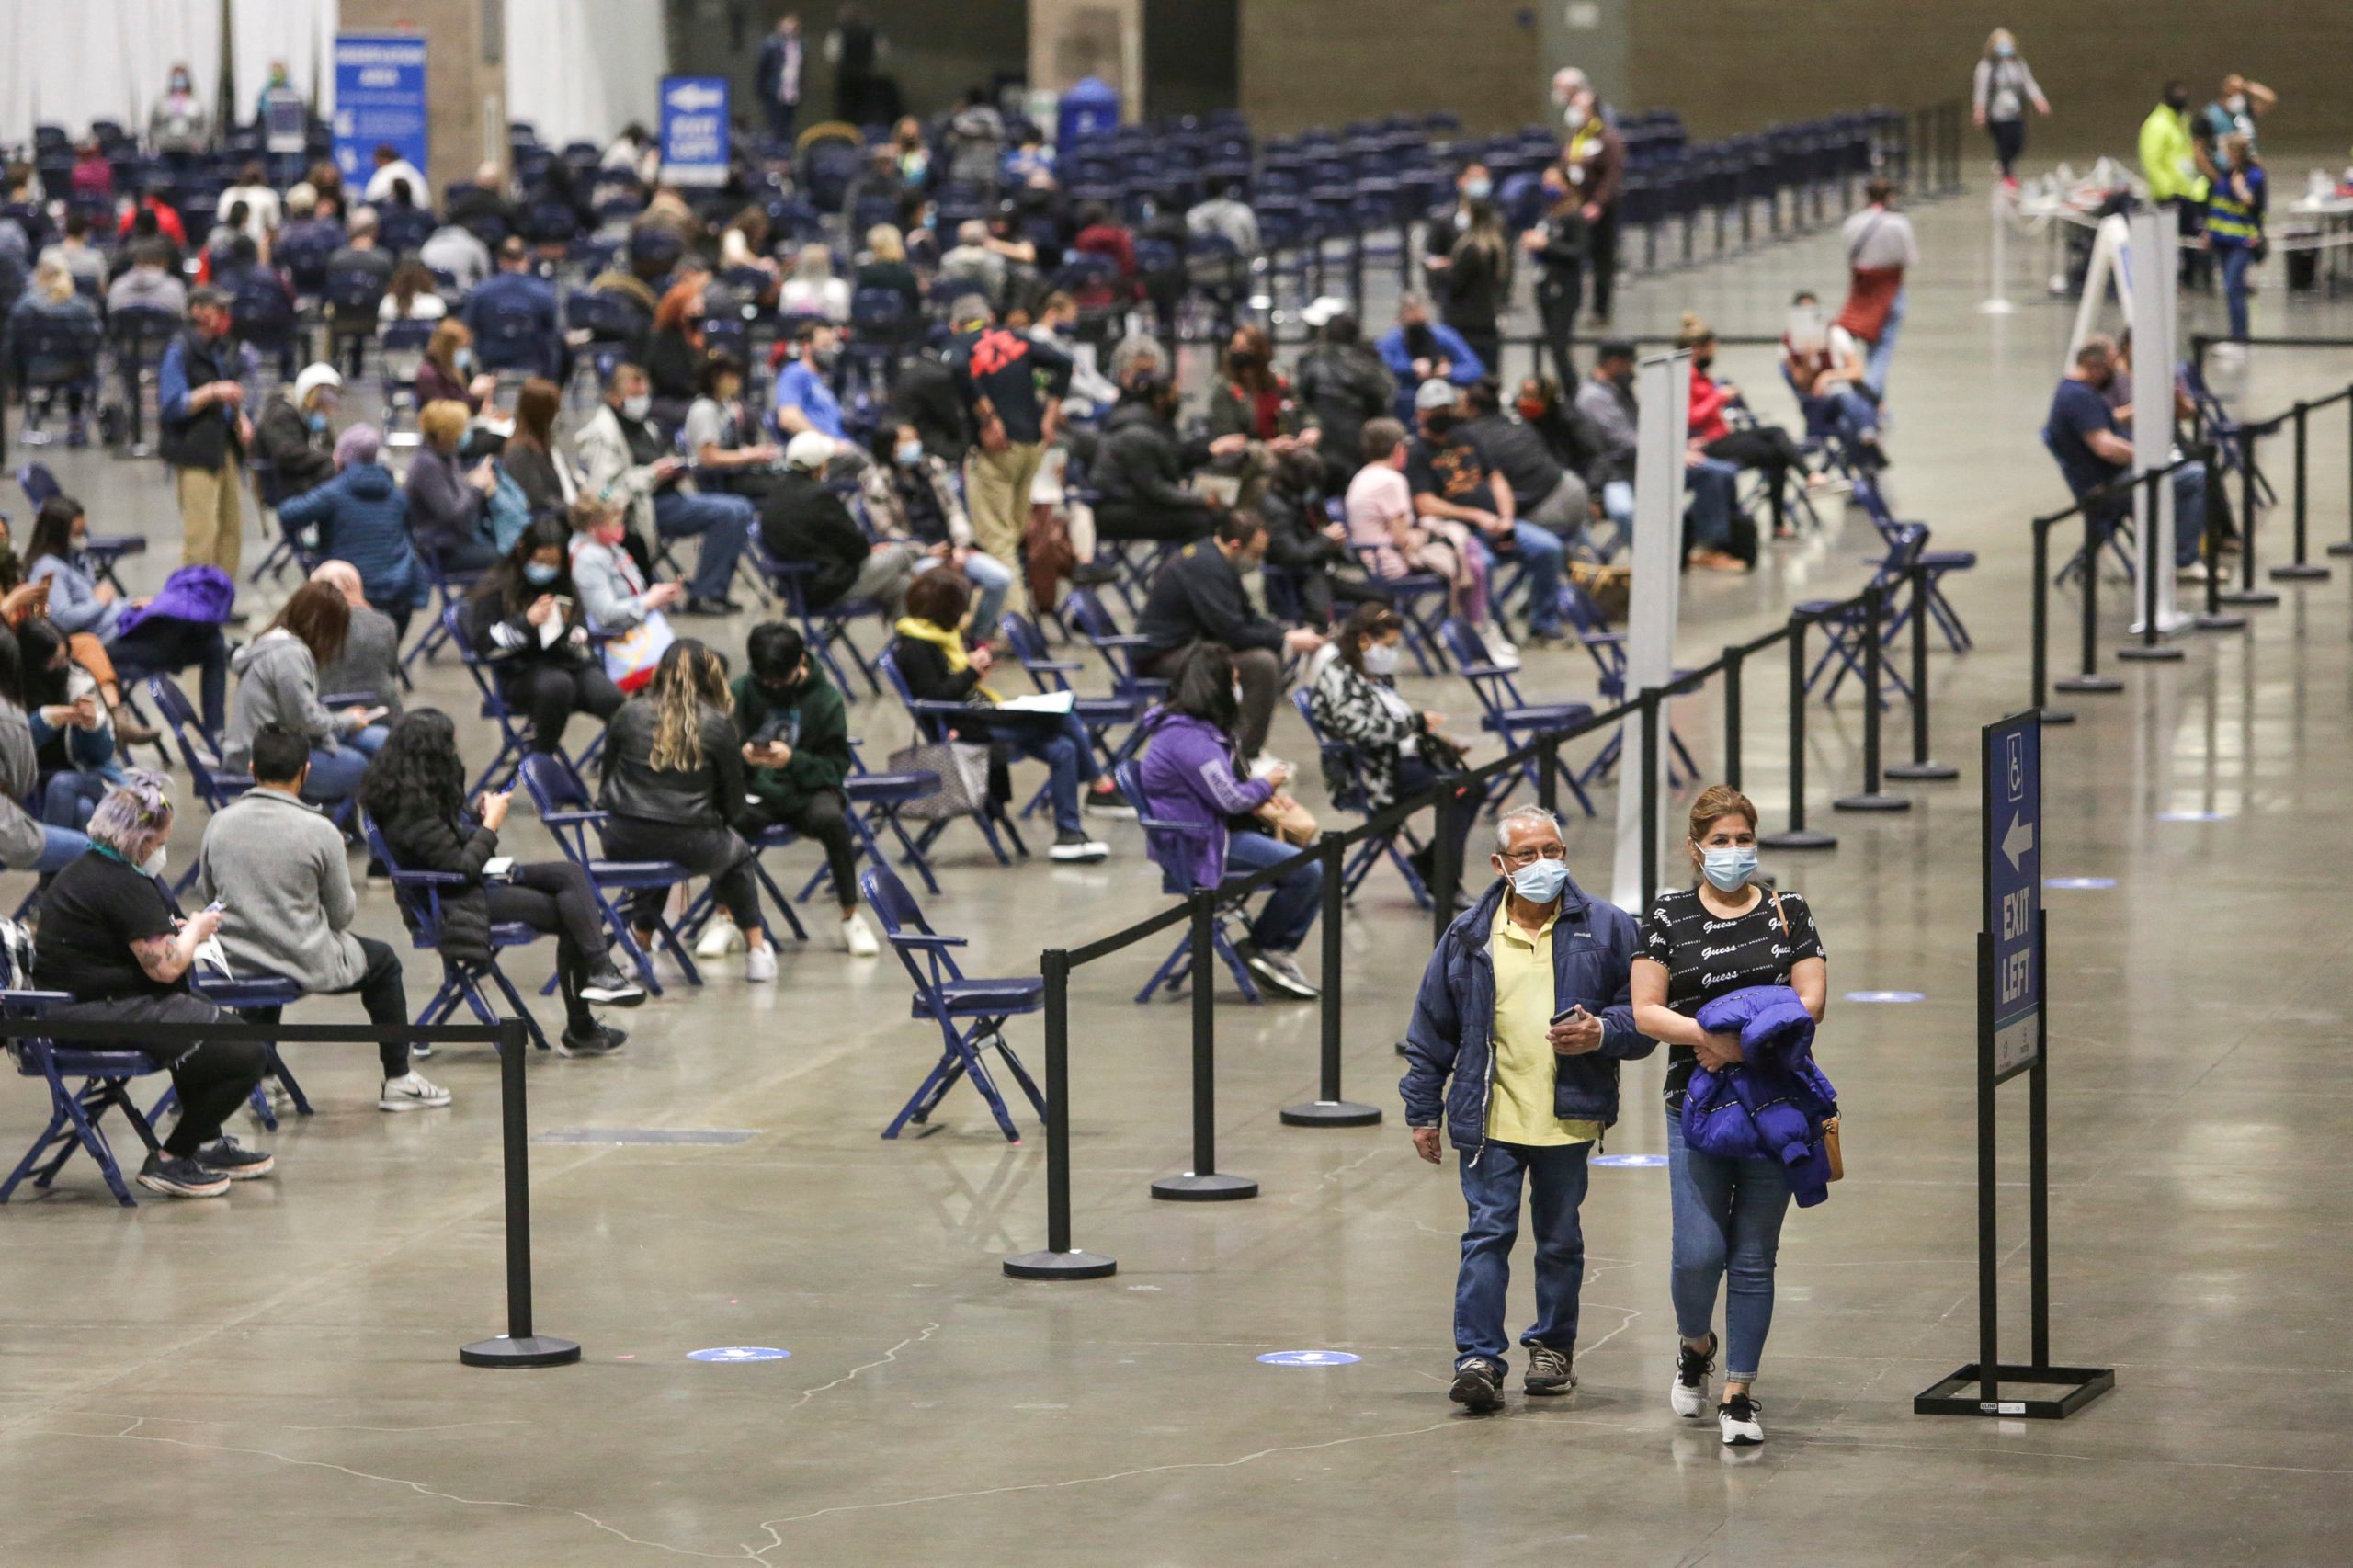 People depart after receiving the Pfizer Covid-19 vaccine in Seattle, Washington on March 13, 2021. (JASON REDMOND/AFP via Getty Images)